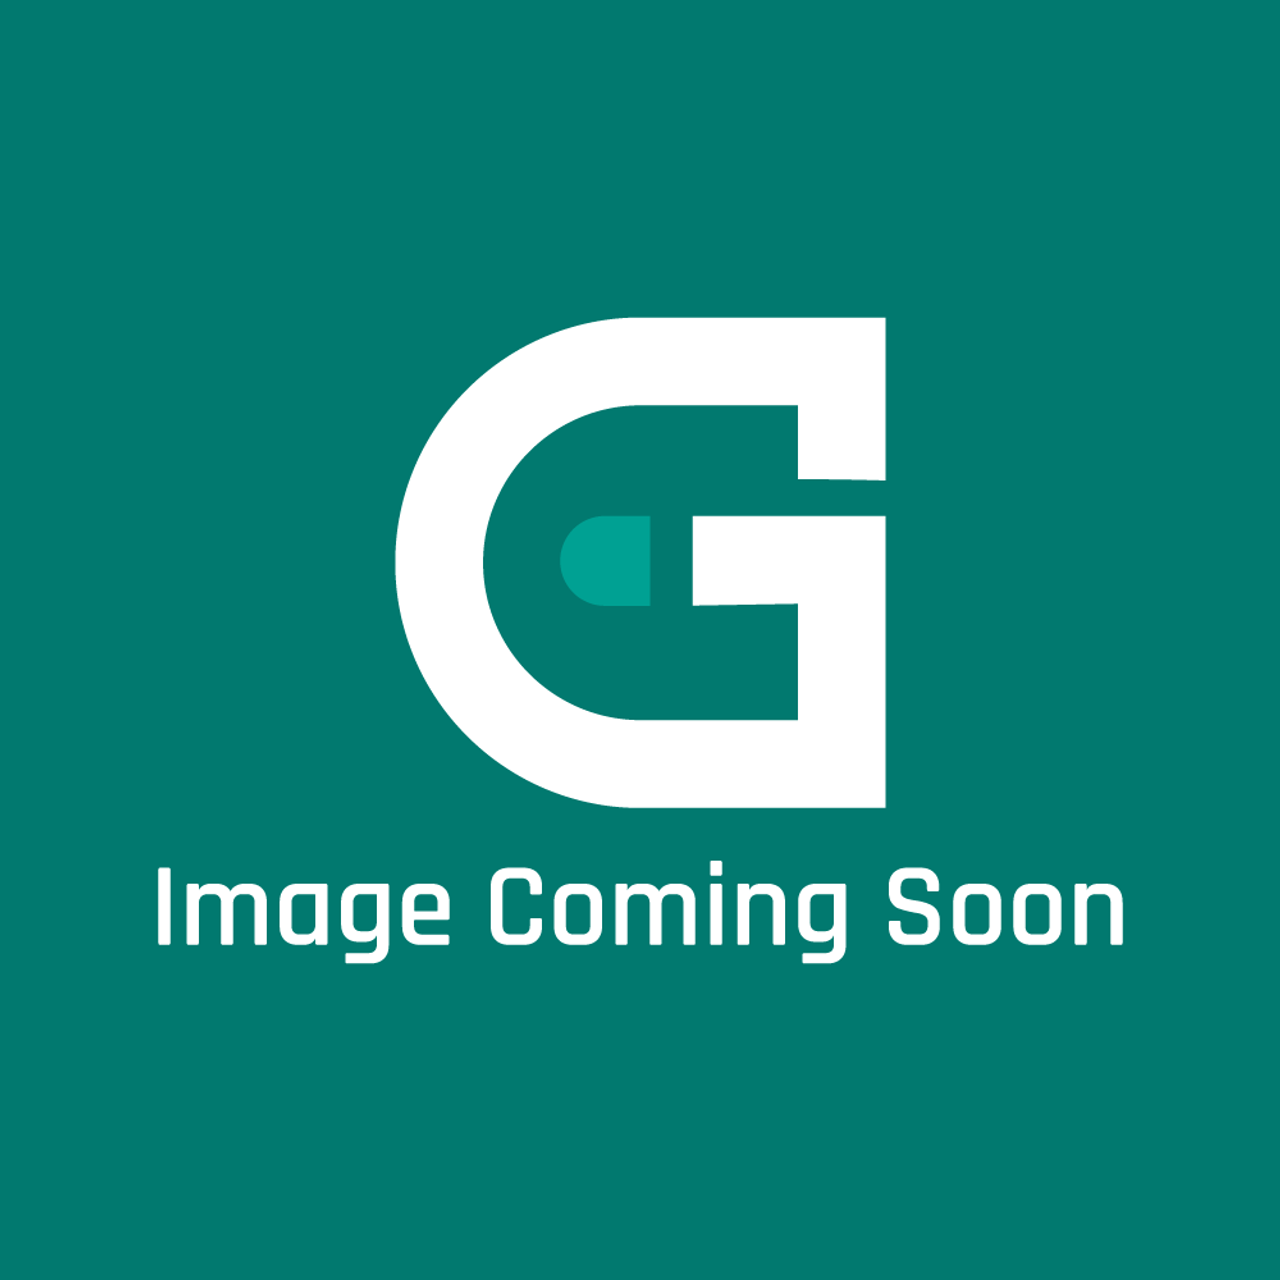 AGA Marvel M0296 - T/Stat Main Oven 55.13649.030 - Image Coming Soon!